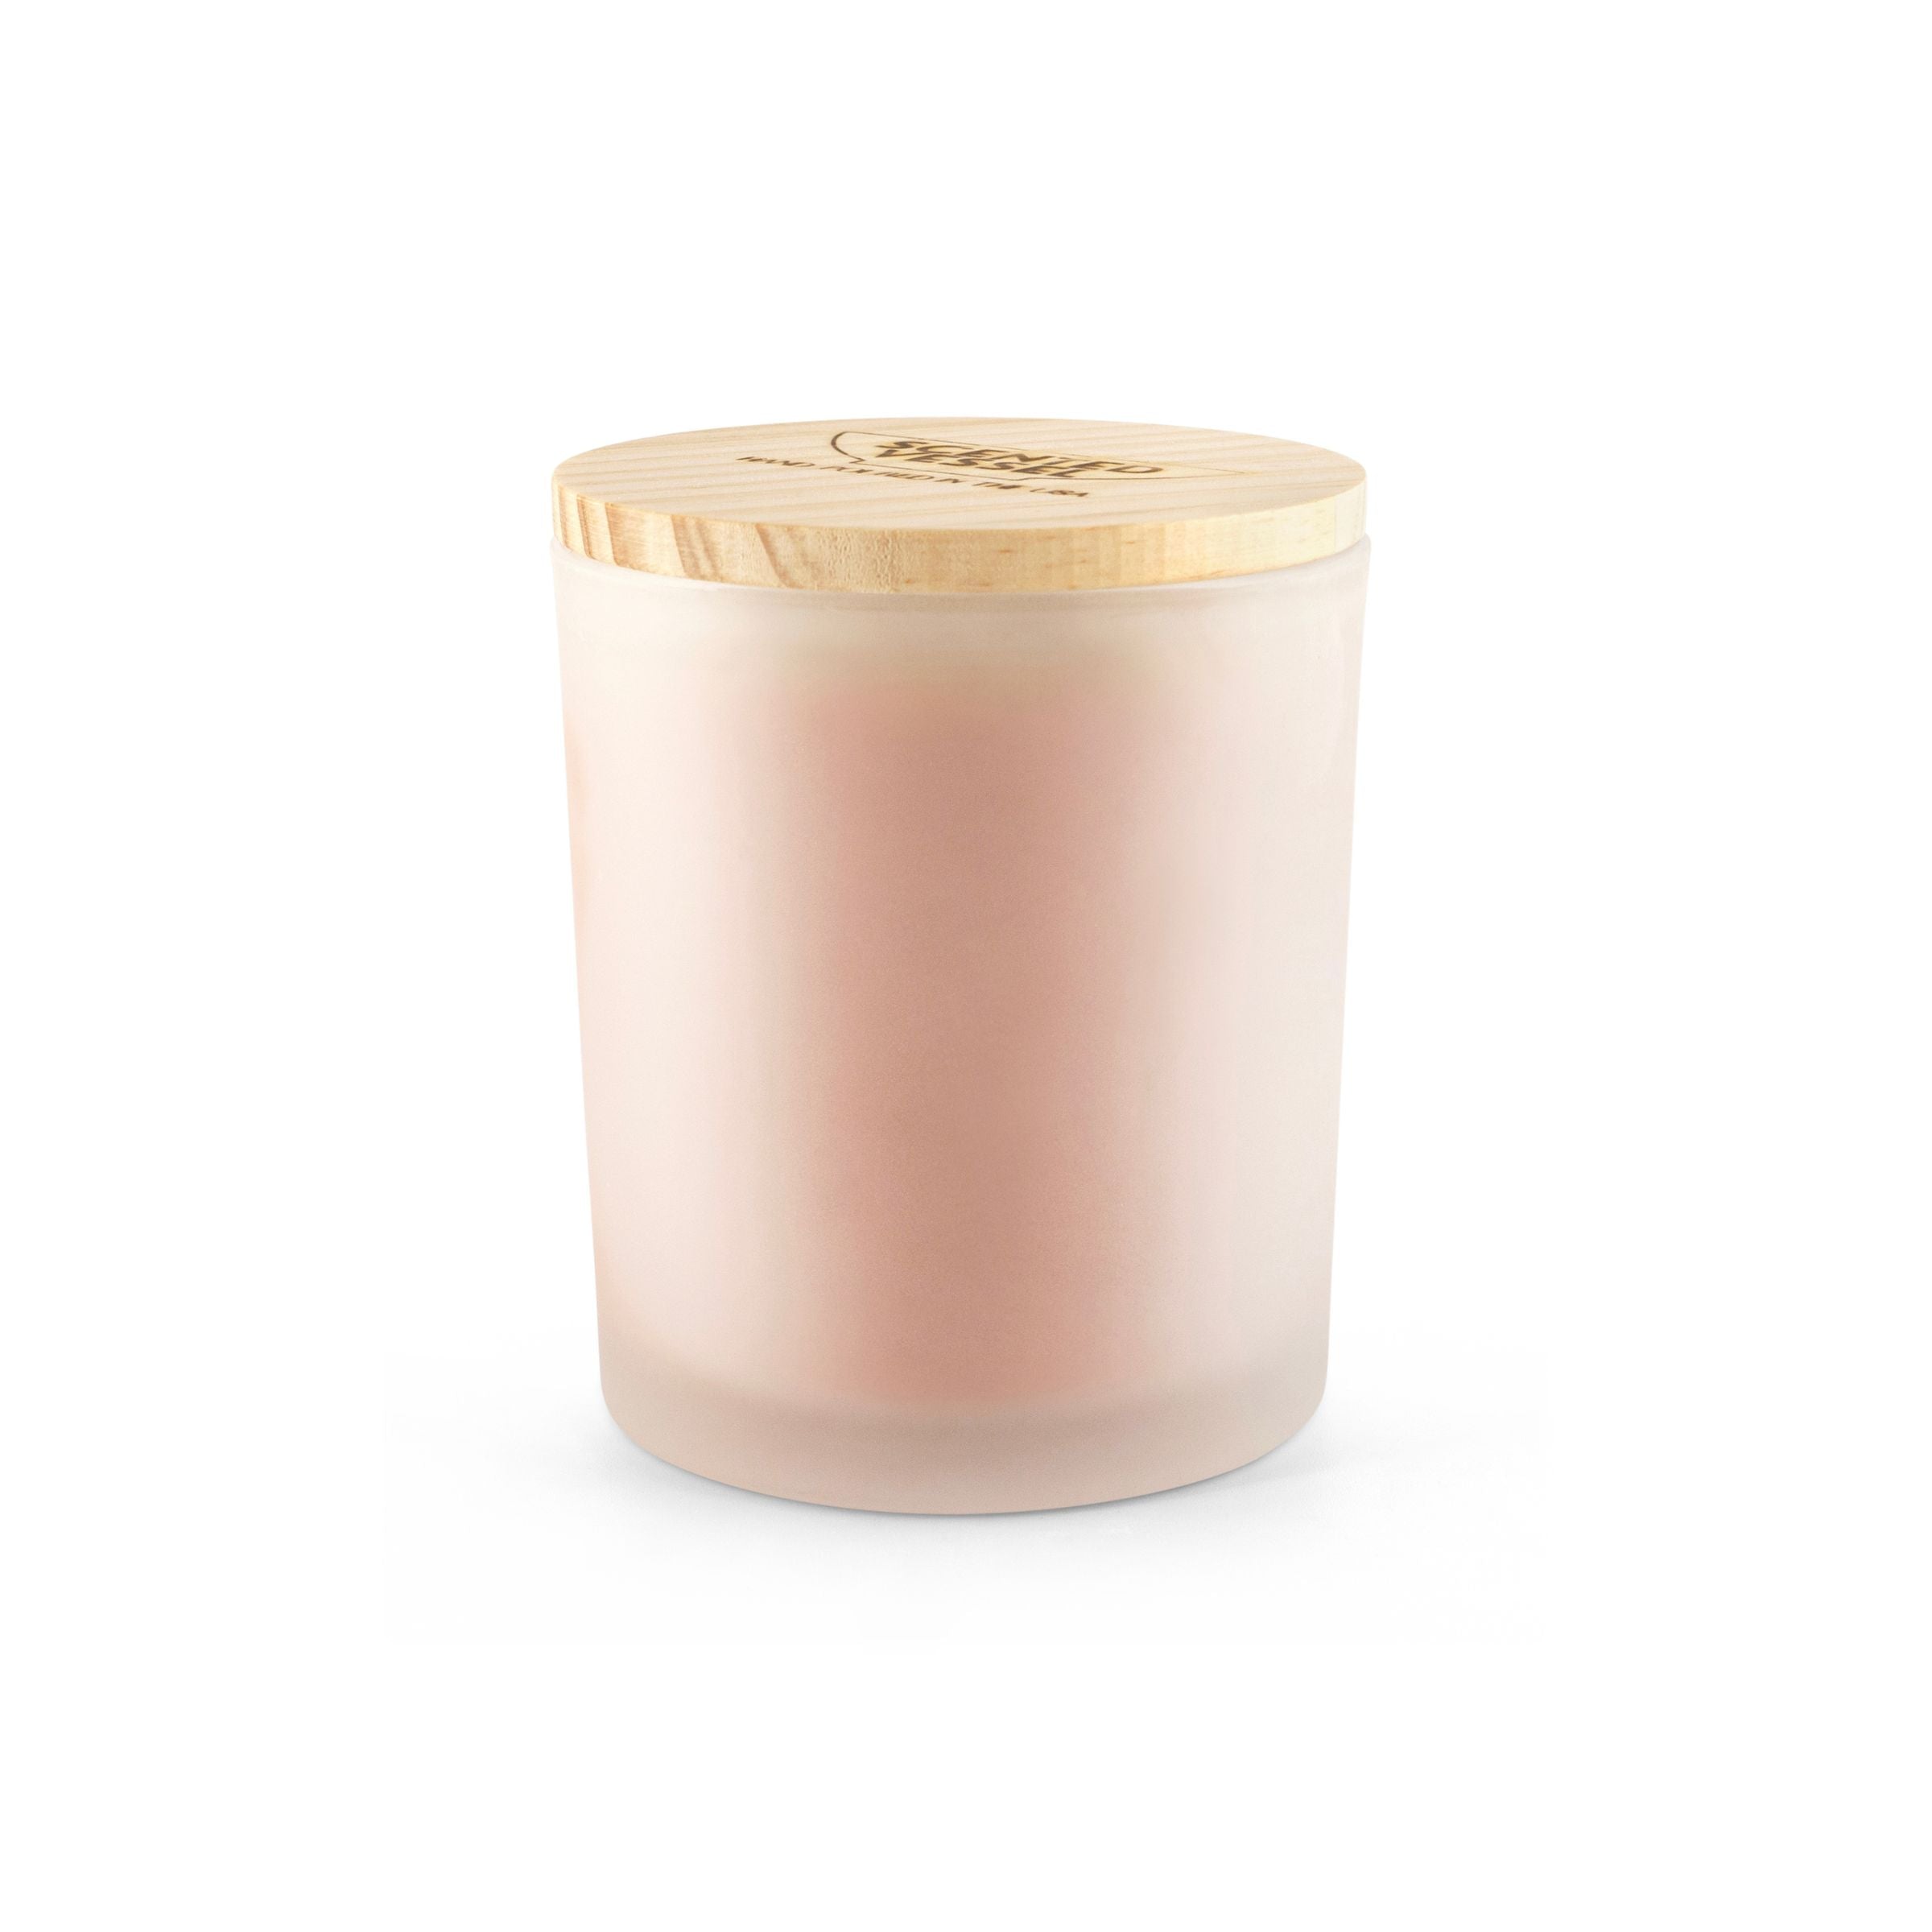 Cinnamon Sticks 7.5oz Frosted Jar Candle by Scented Vessel